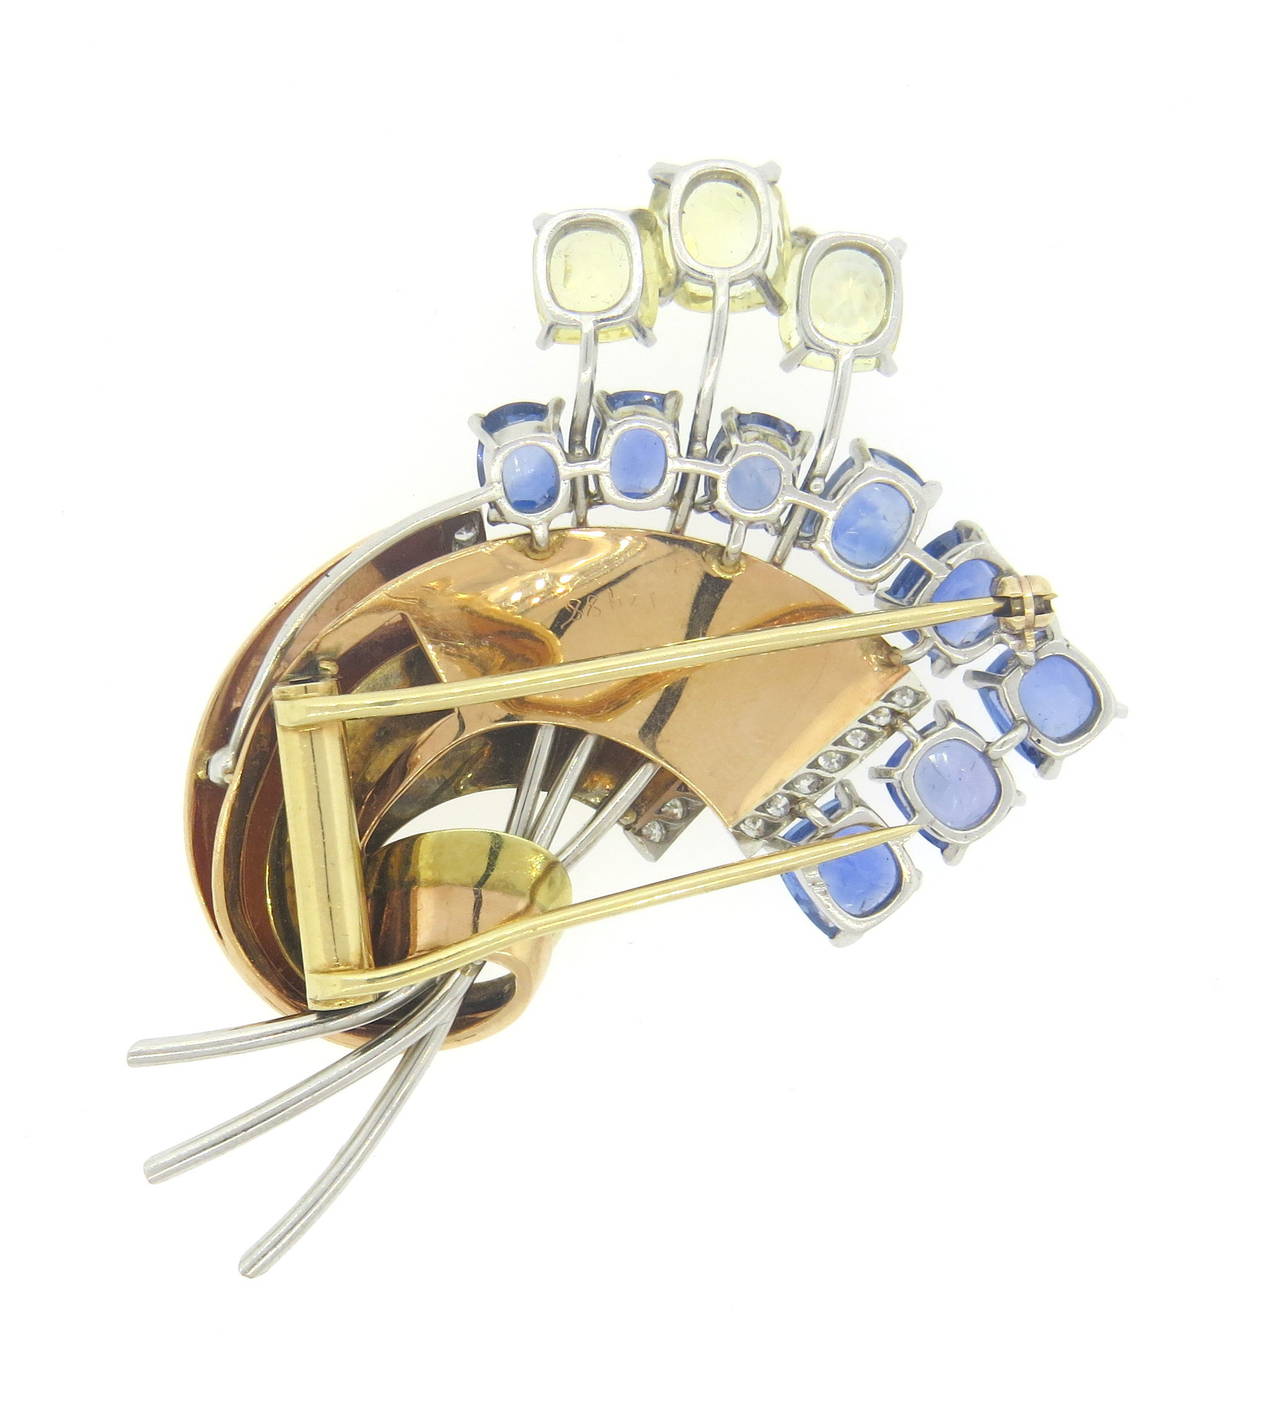 Mid century brooch, crafted in yellow and rose 14k gold with platinum accents, featuring EGL certified no heat sapphires and round brilliant diamonds. Brooch measures 55mm x 45mm. Weight of the piece - 30.8 grams